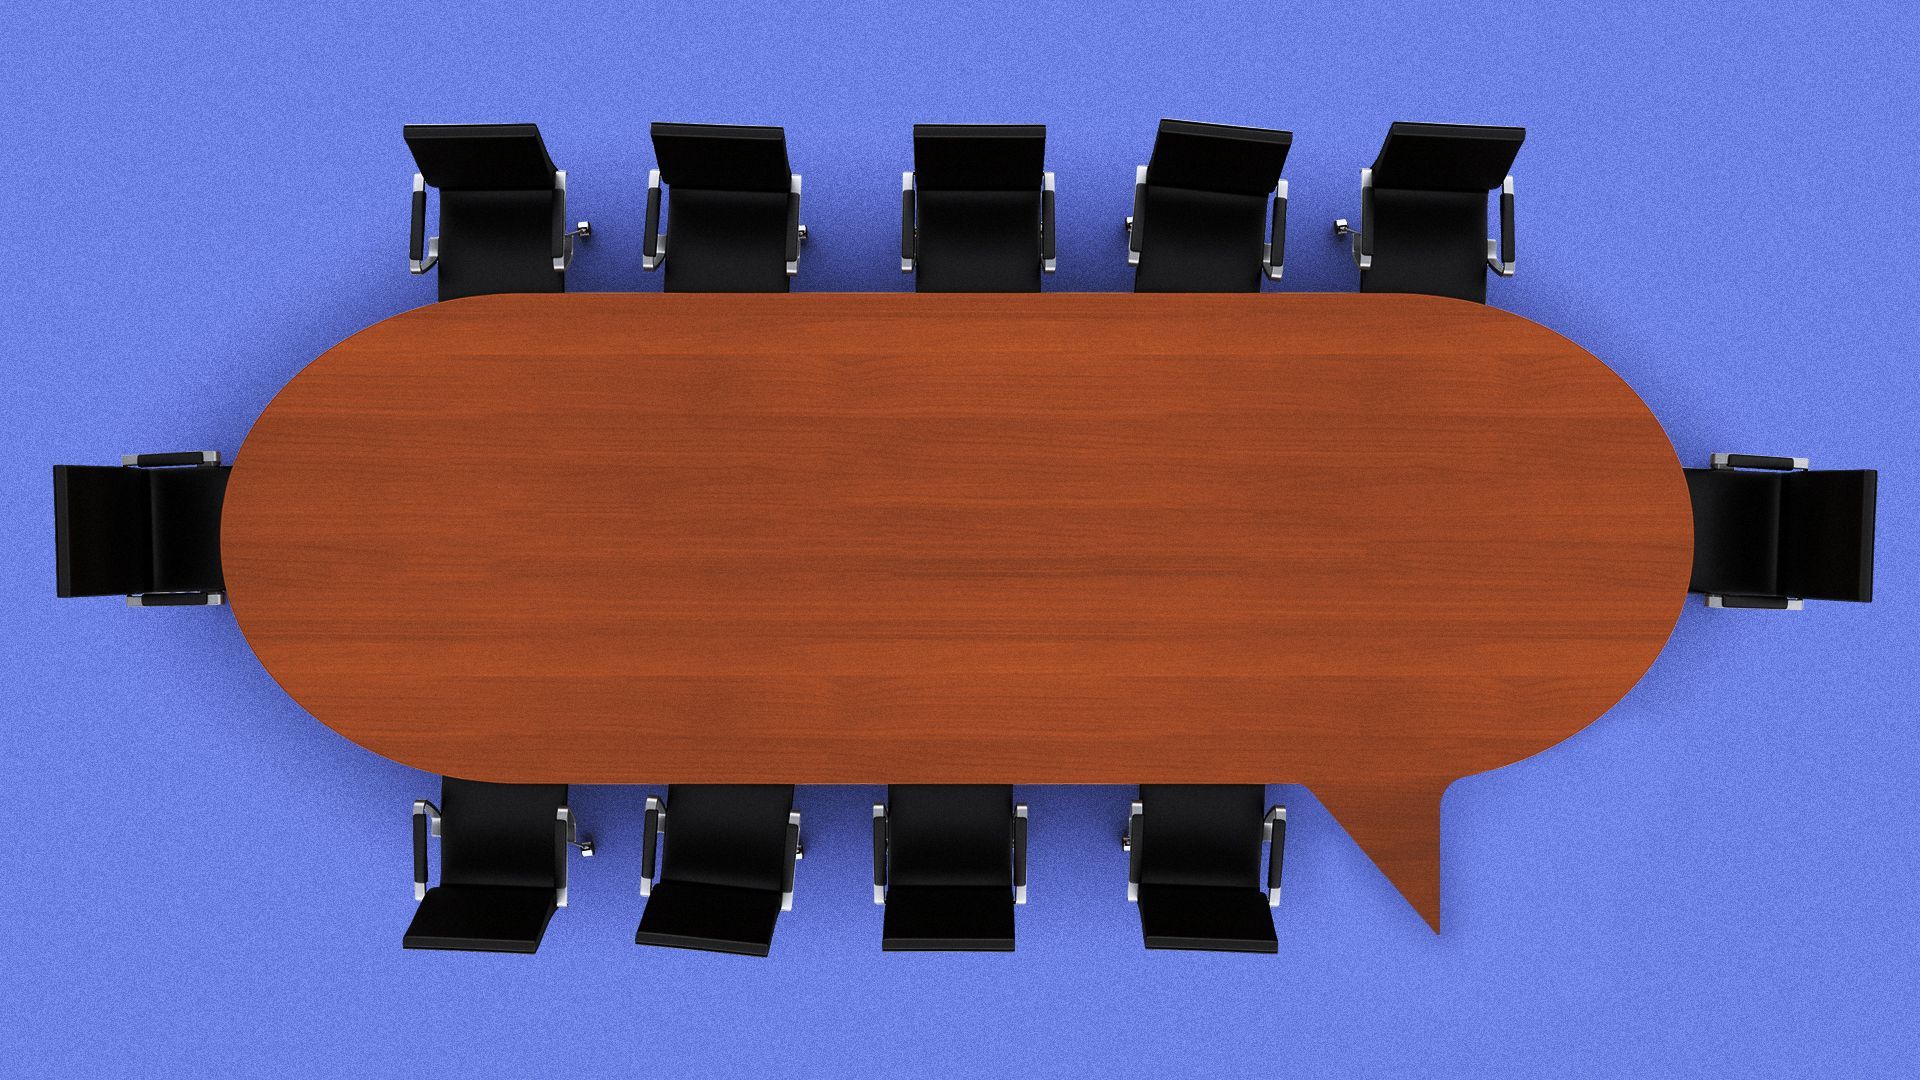 Illustration of a boardroom table shaped like a speech bubble surrounded by chairs.